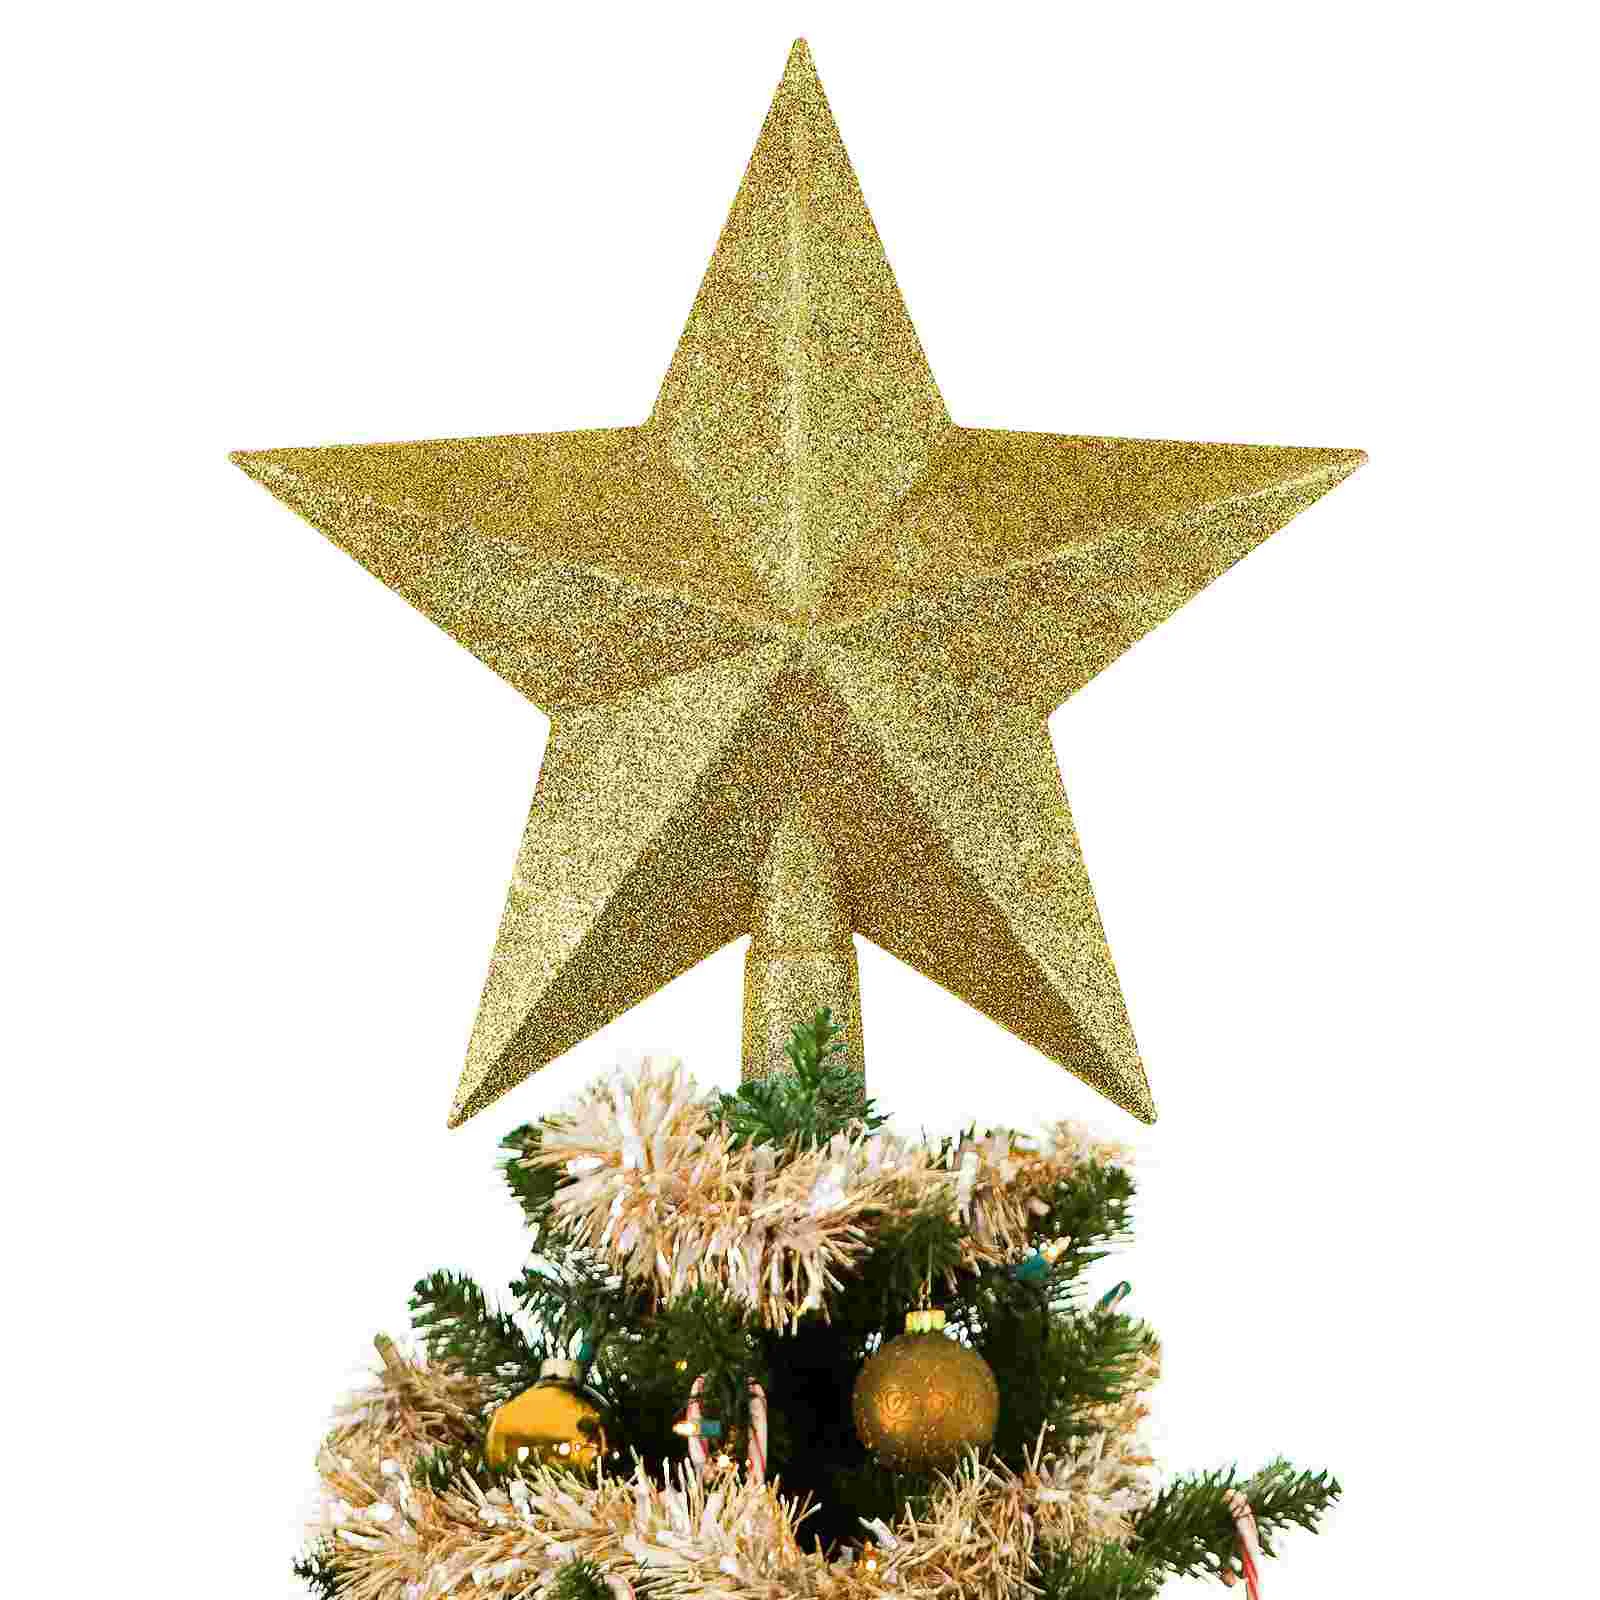 

Christmas Tree Topper Gold Festival Decorations Star Shape Toppers for Shiny Five-point Treetop Ornament Solid